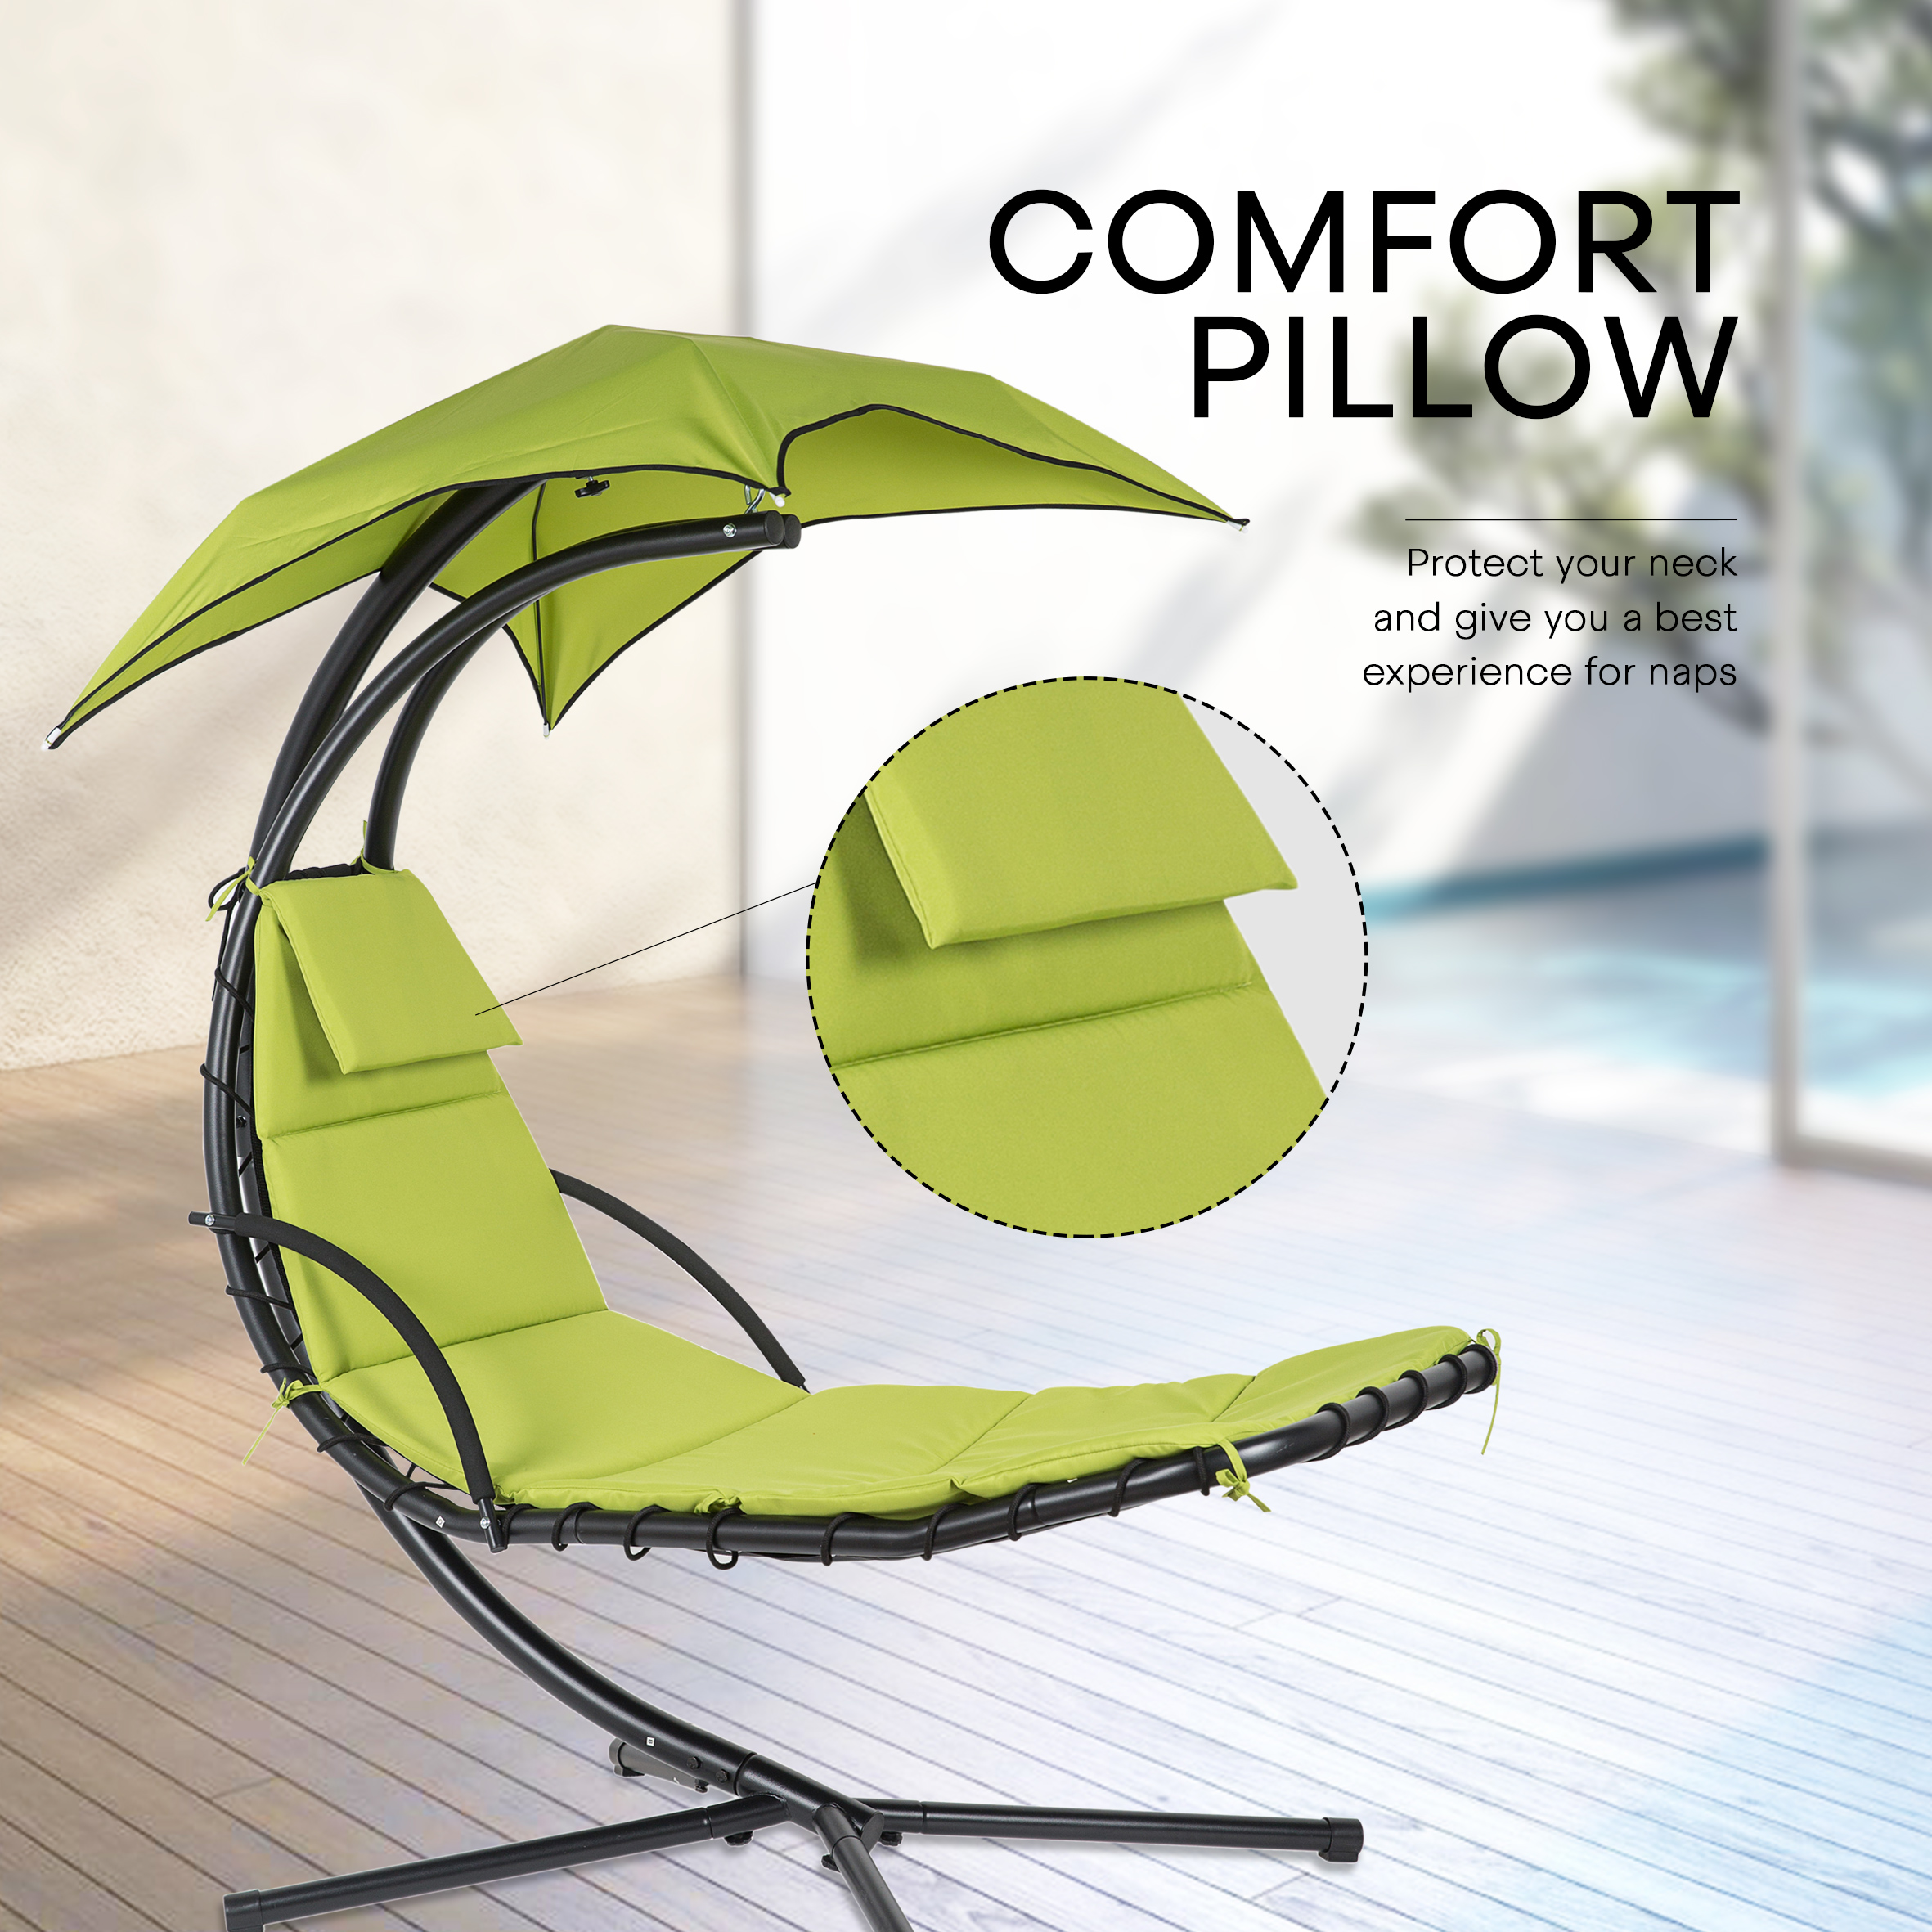 Finefind Hanging Chaise Lounge Chair Floating Swing Hammock Chair Steel Patio, Green - image 2 of 7